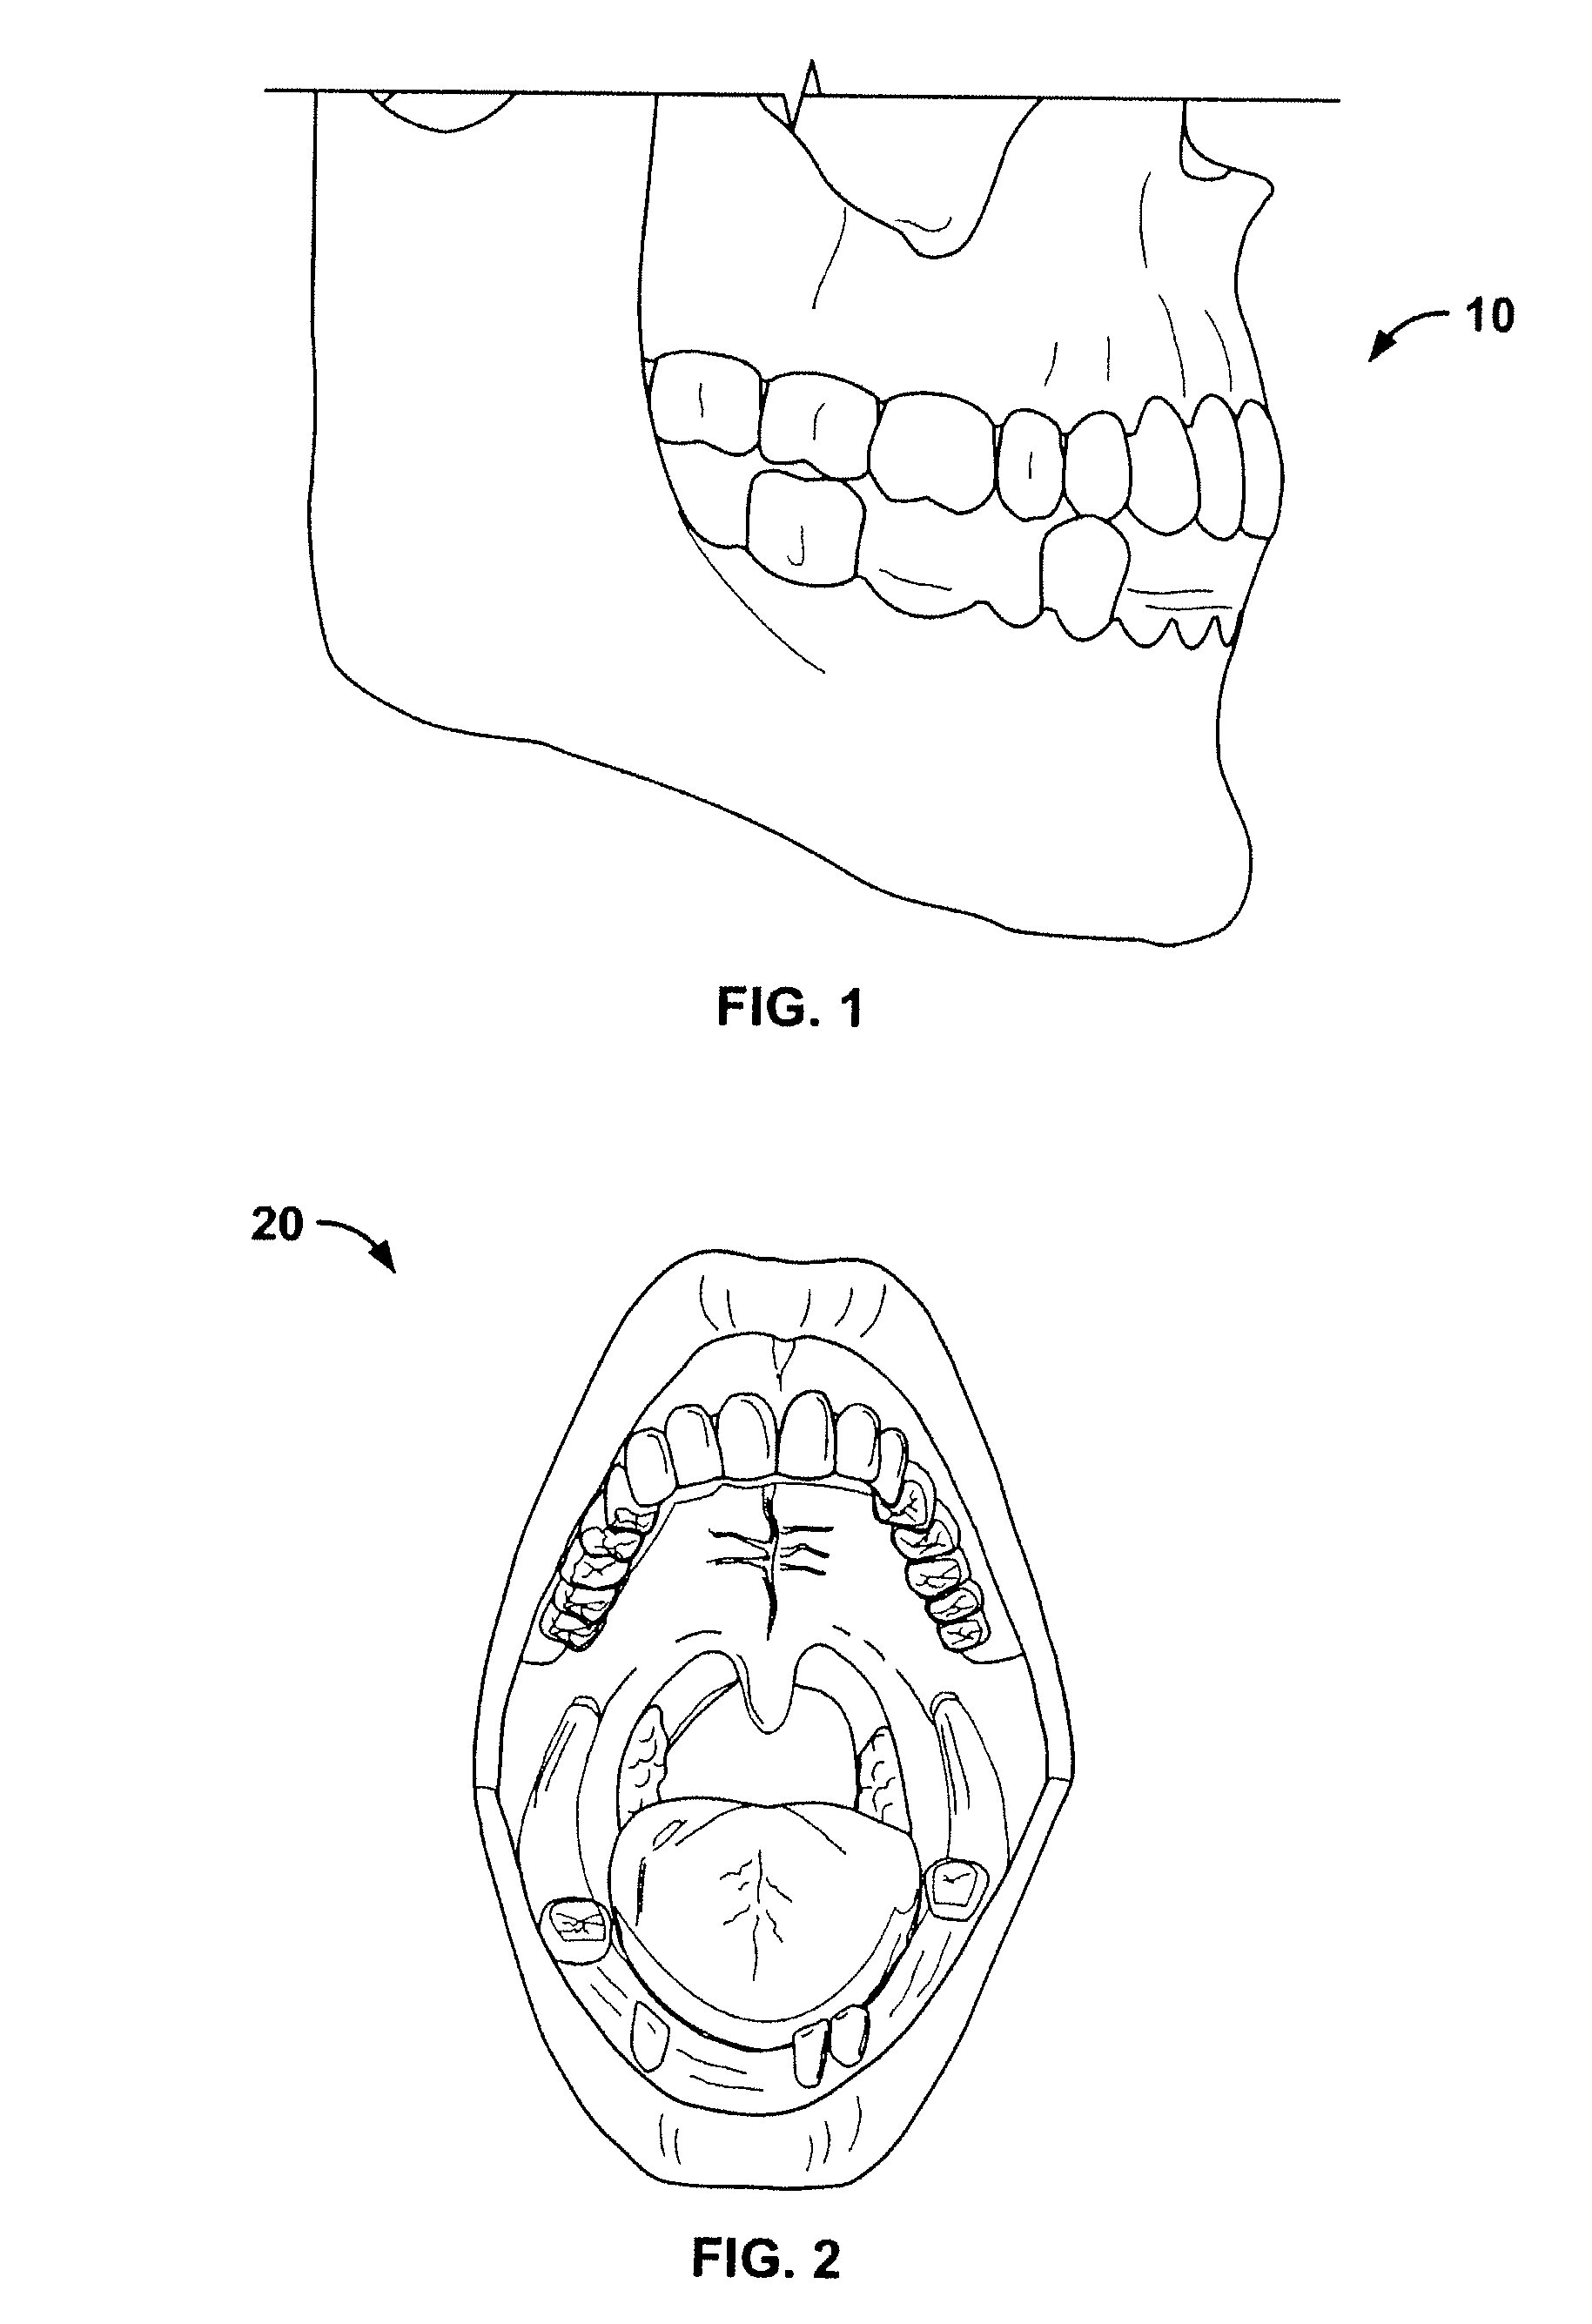 Method for pre-operative visualization of instrumentation used with a surgical guide for dental implant placement